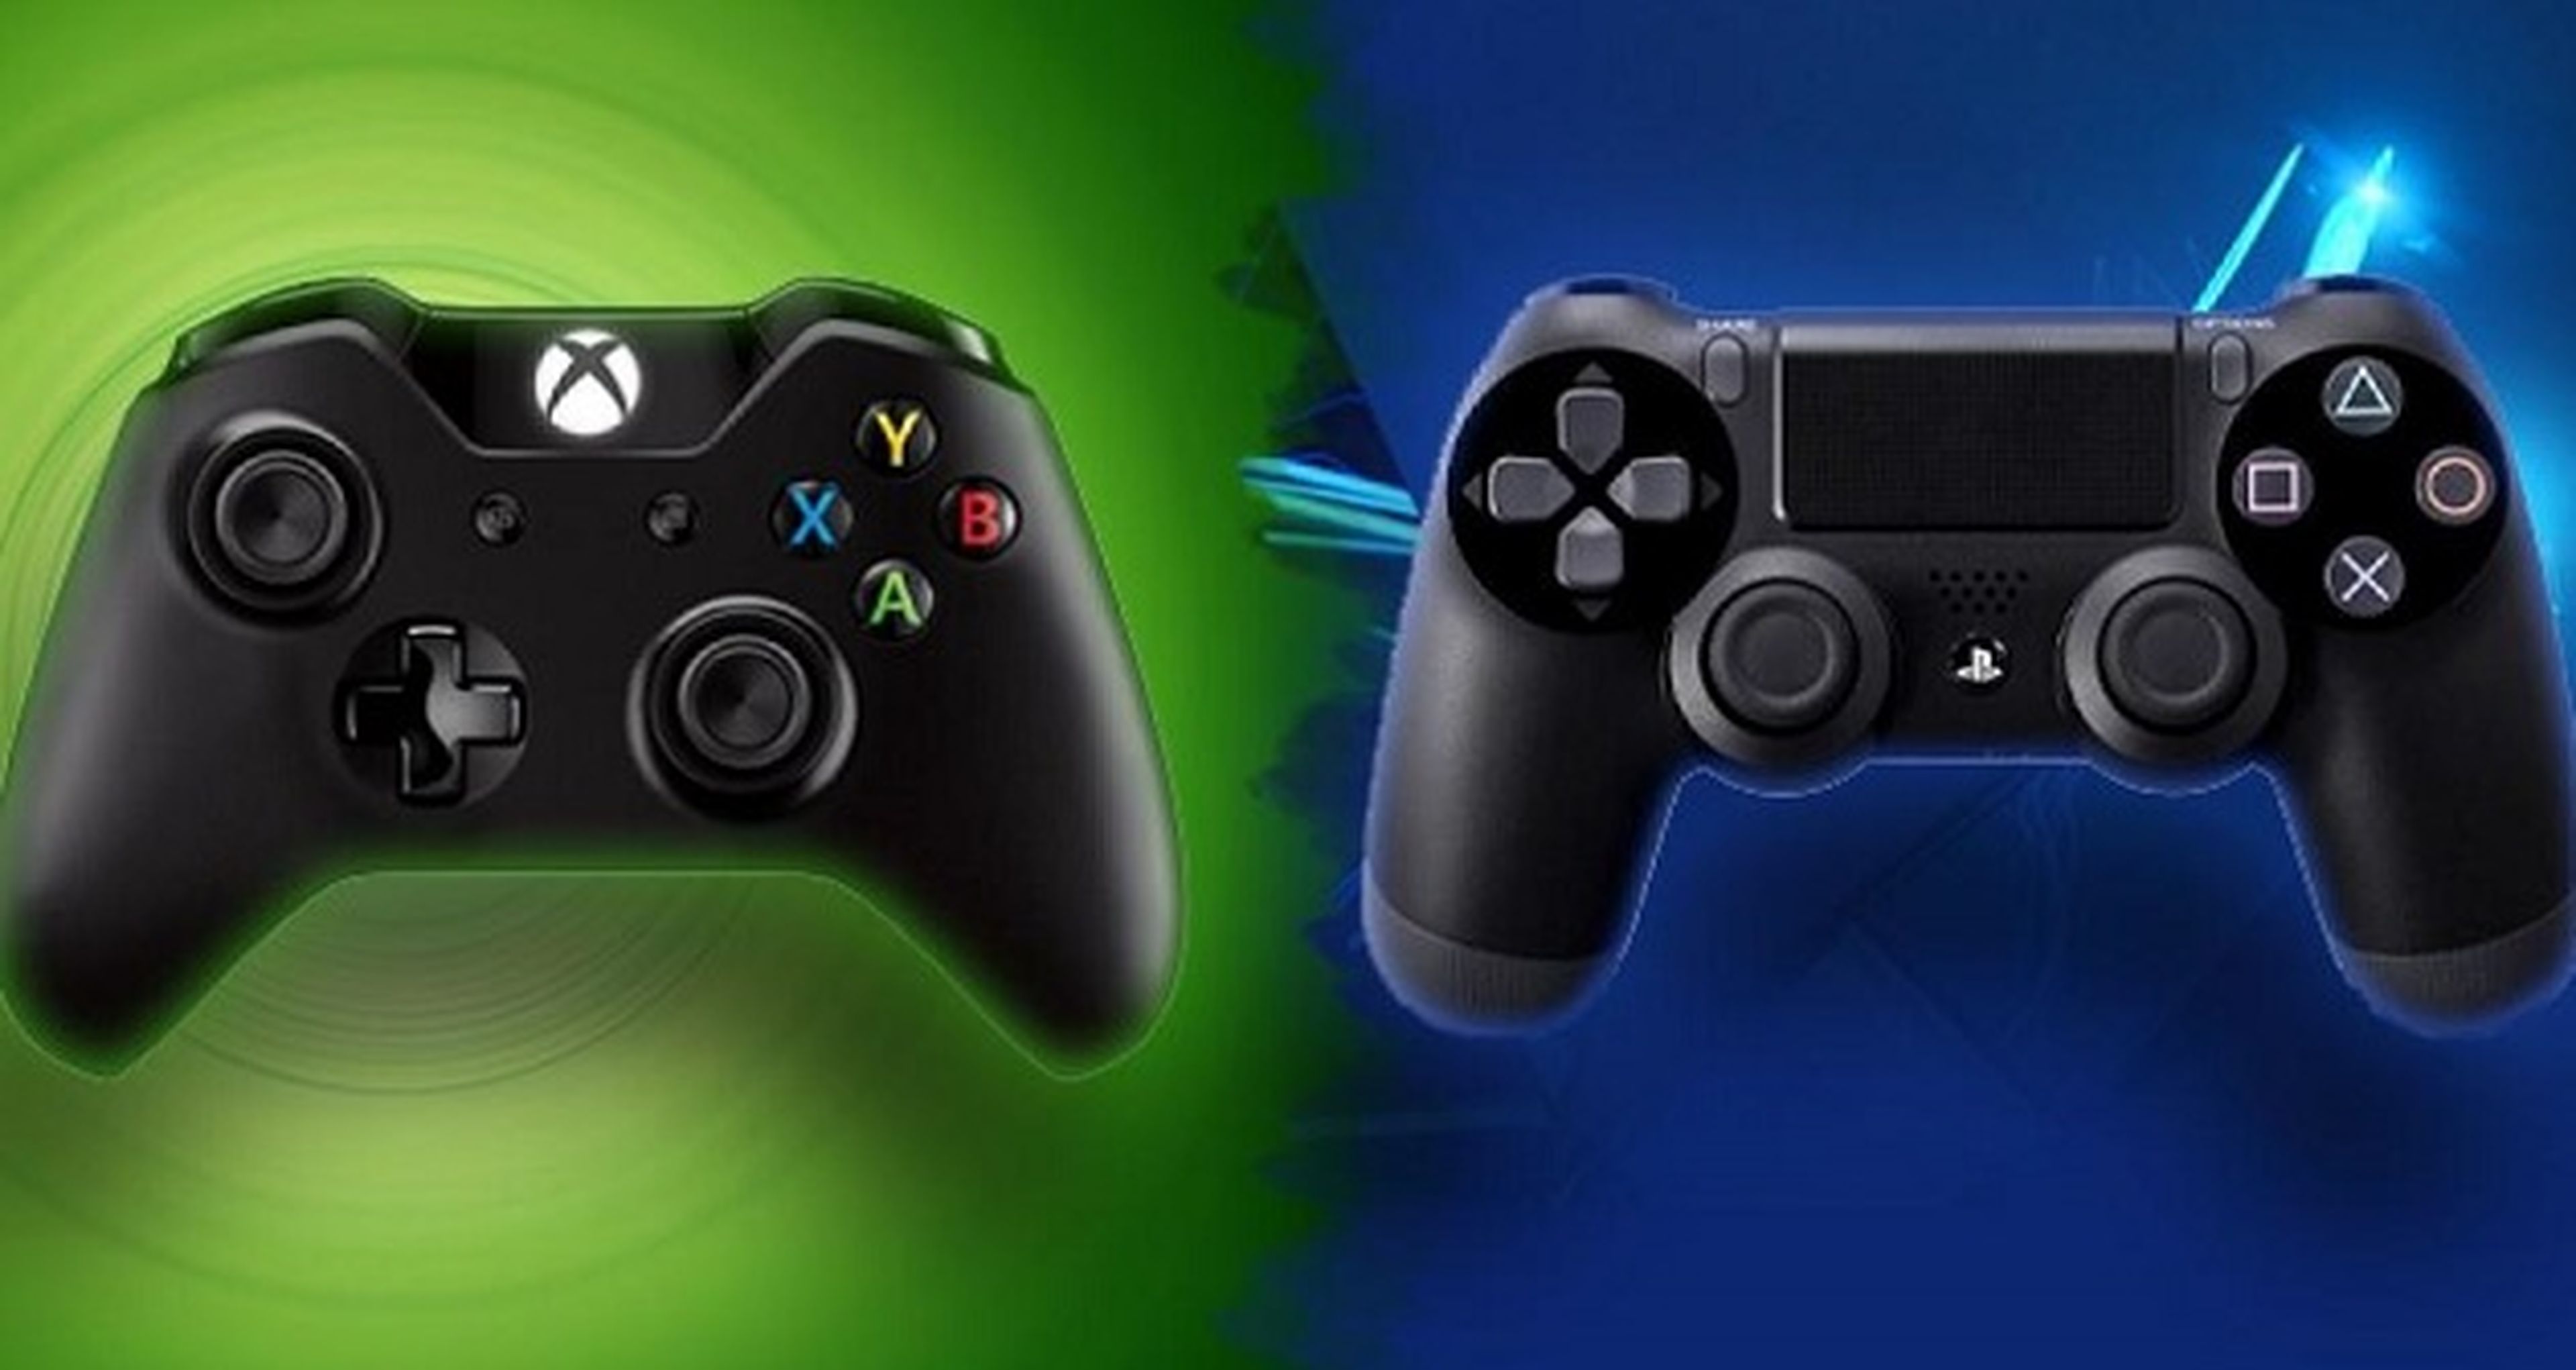 Michael Pachter dice que Xbox One no puede hacer nada para acercarse a PS4